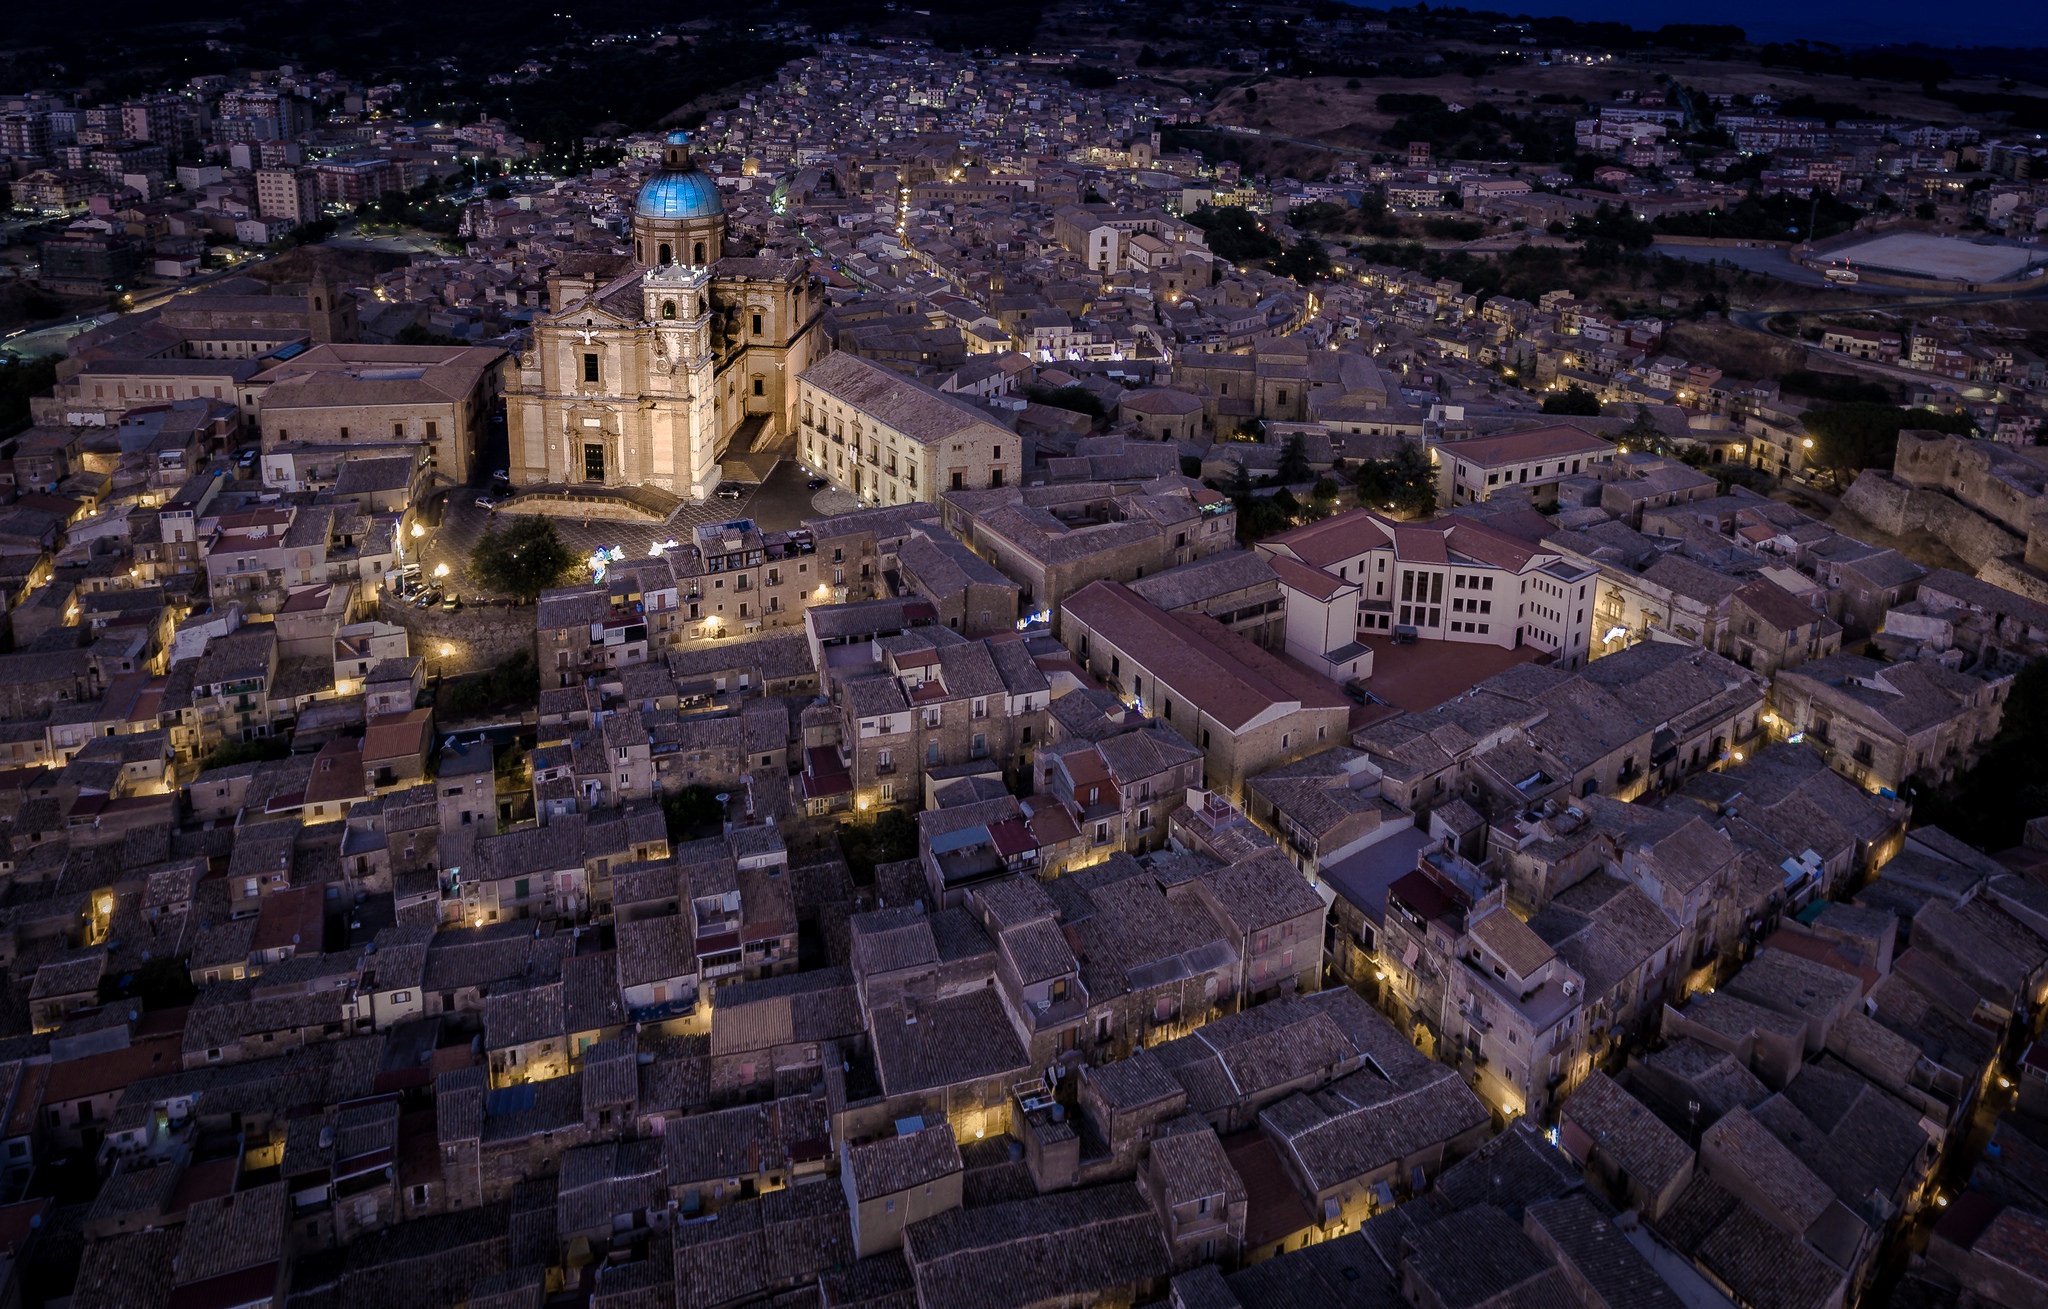 town, Aerial view, Sicily, Italy, Piazza Armerina, Cathedral Wallpaper